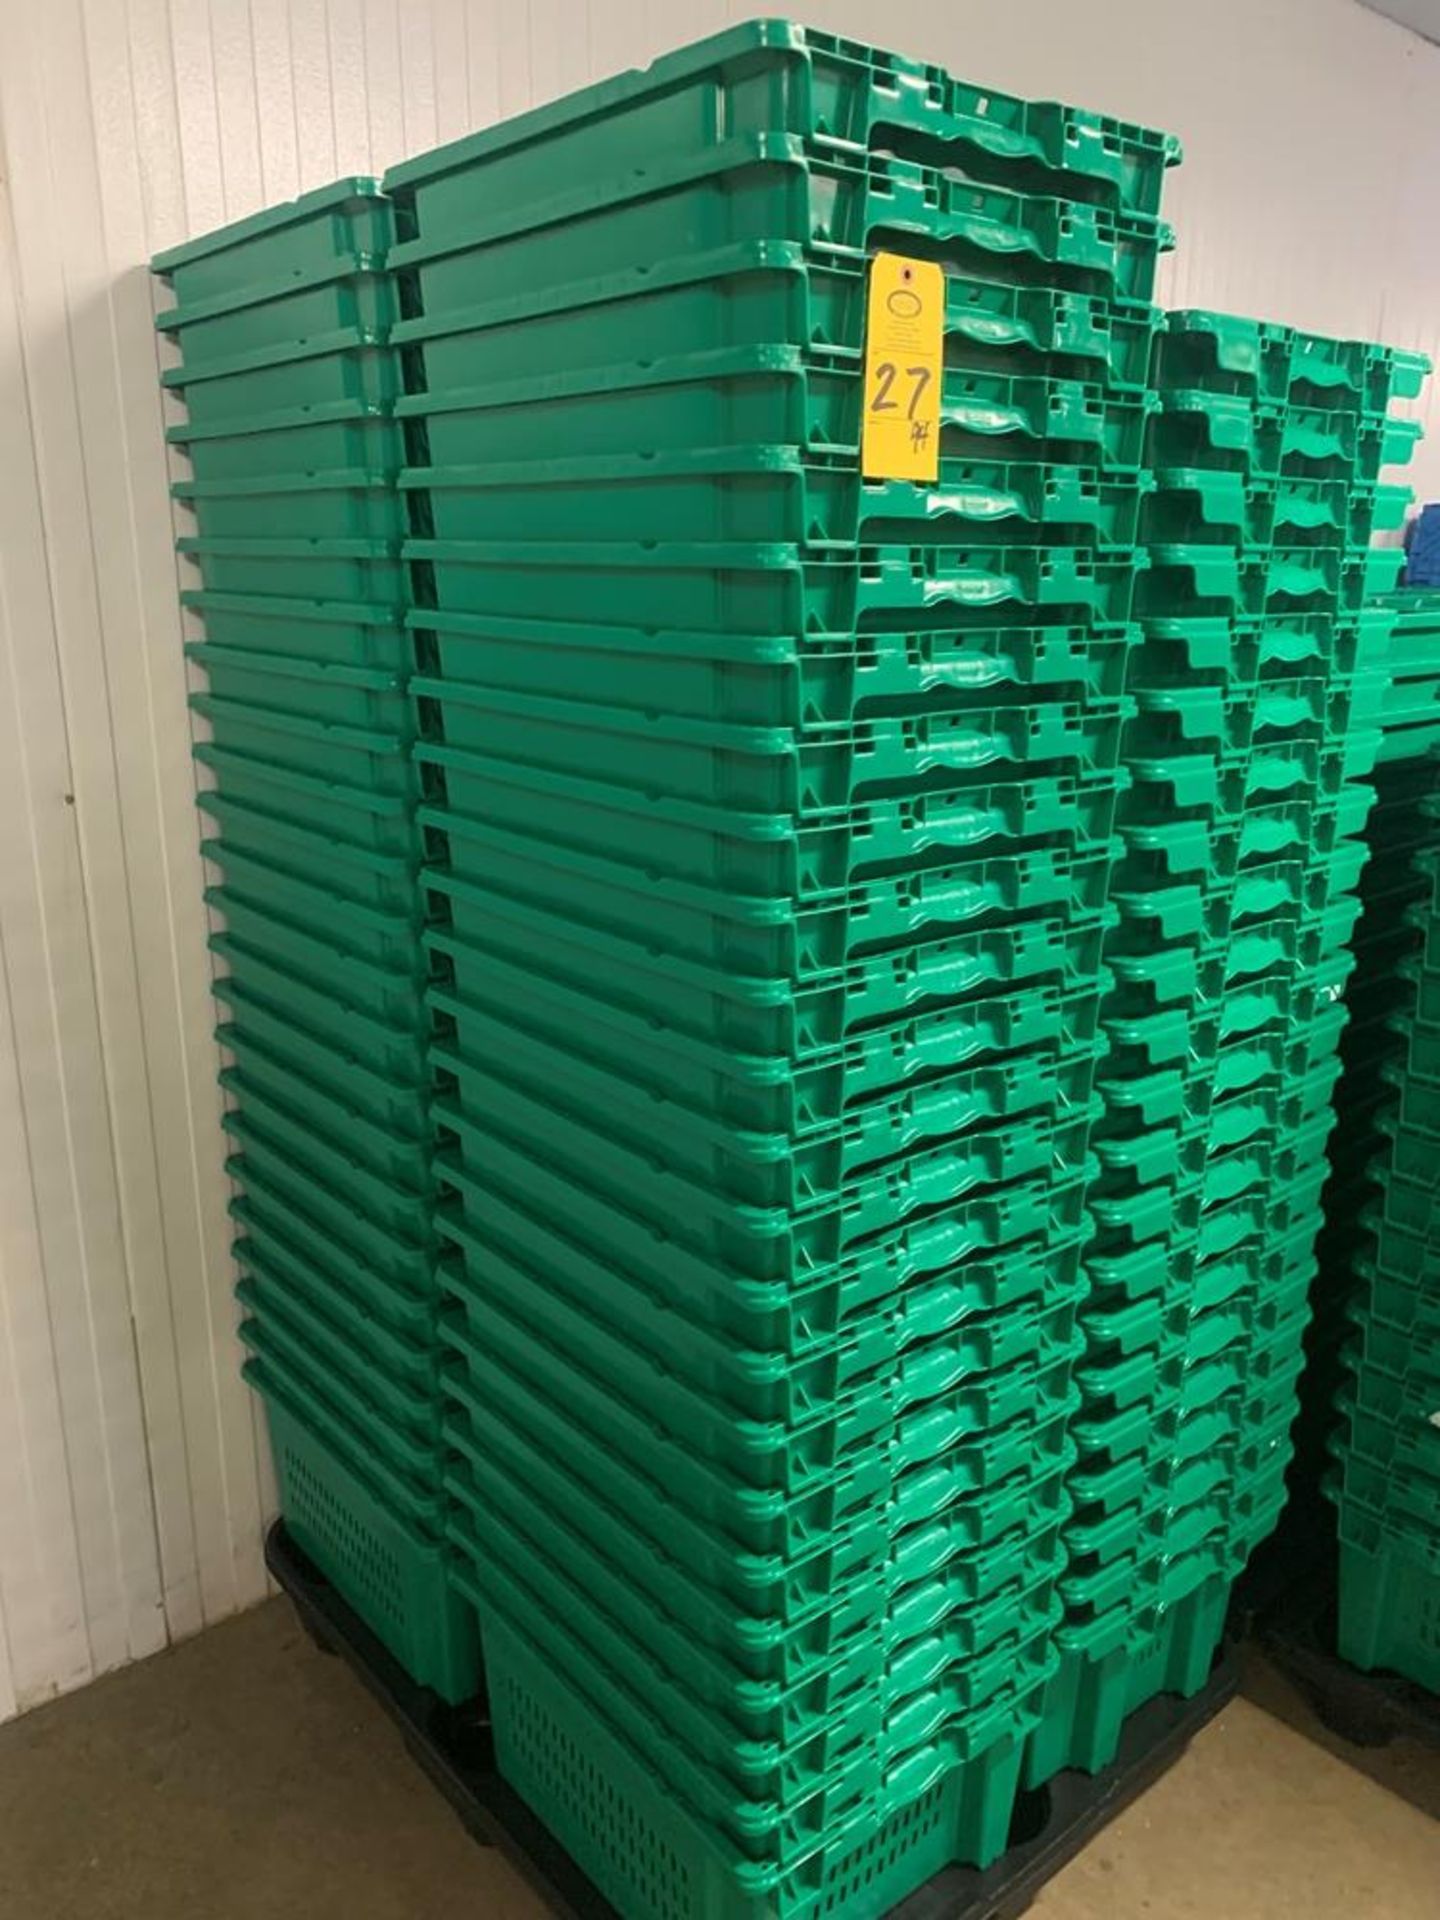 Orbis Mdl. GS6050-27 Plastic Totes, 18" X 22" X 12" (Required Loading Fee: $25.00) NO HAND CARRY ( - Image 2 of 3